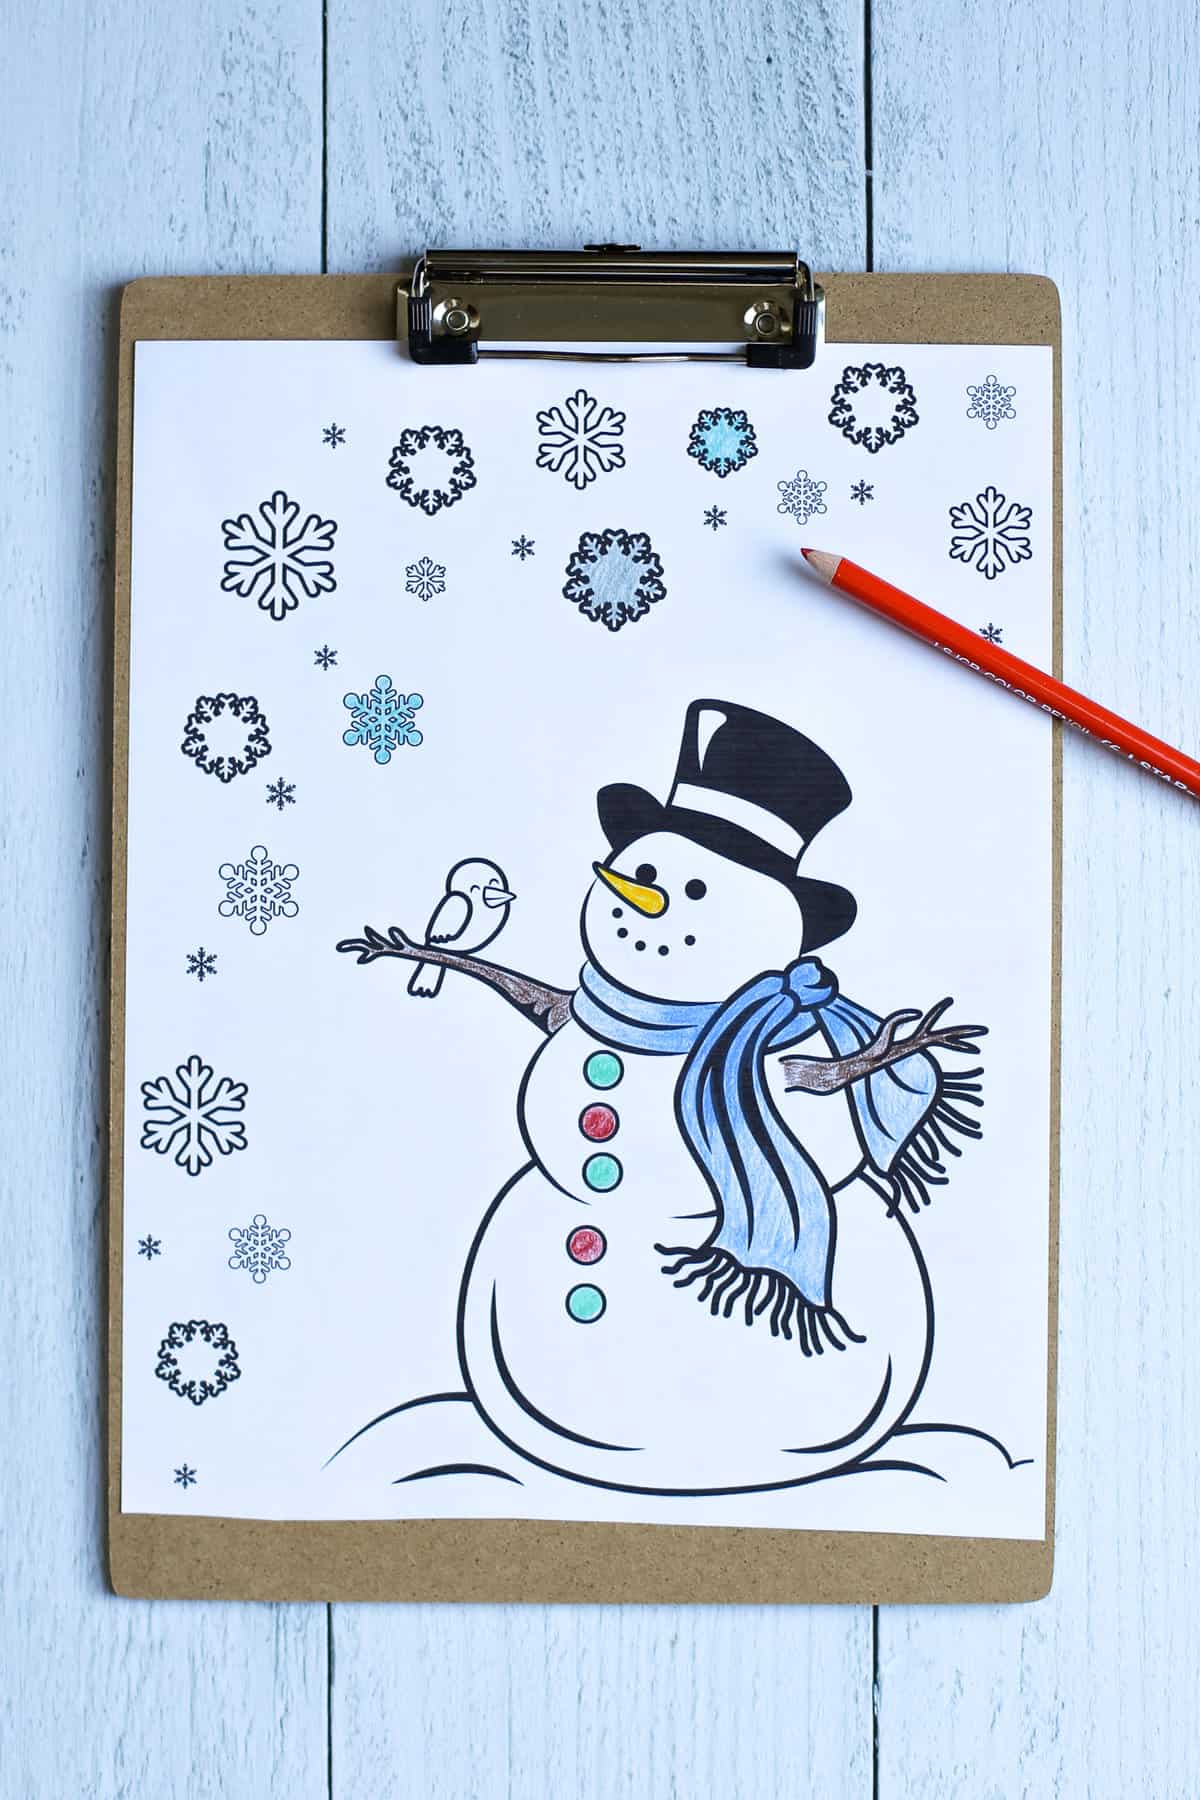 Snowman coloring page on a clipboard partially colored in.